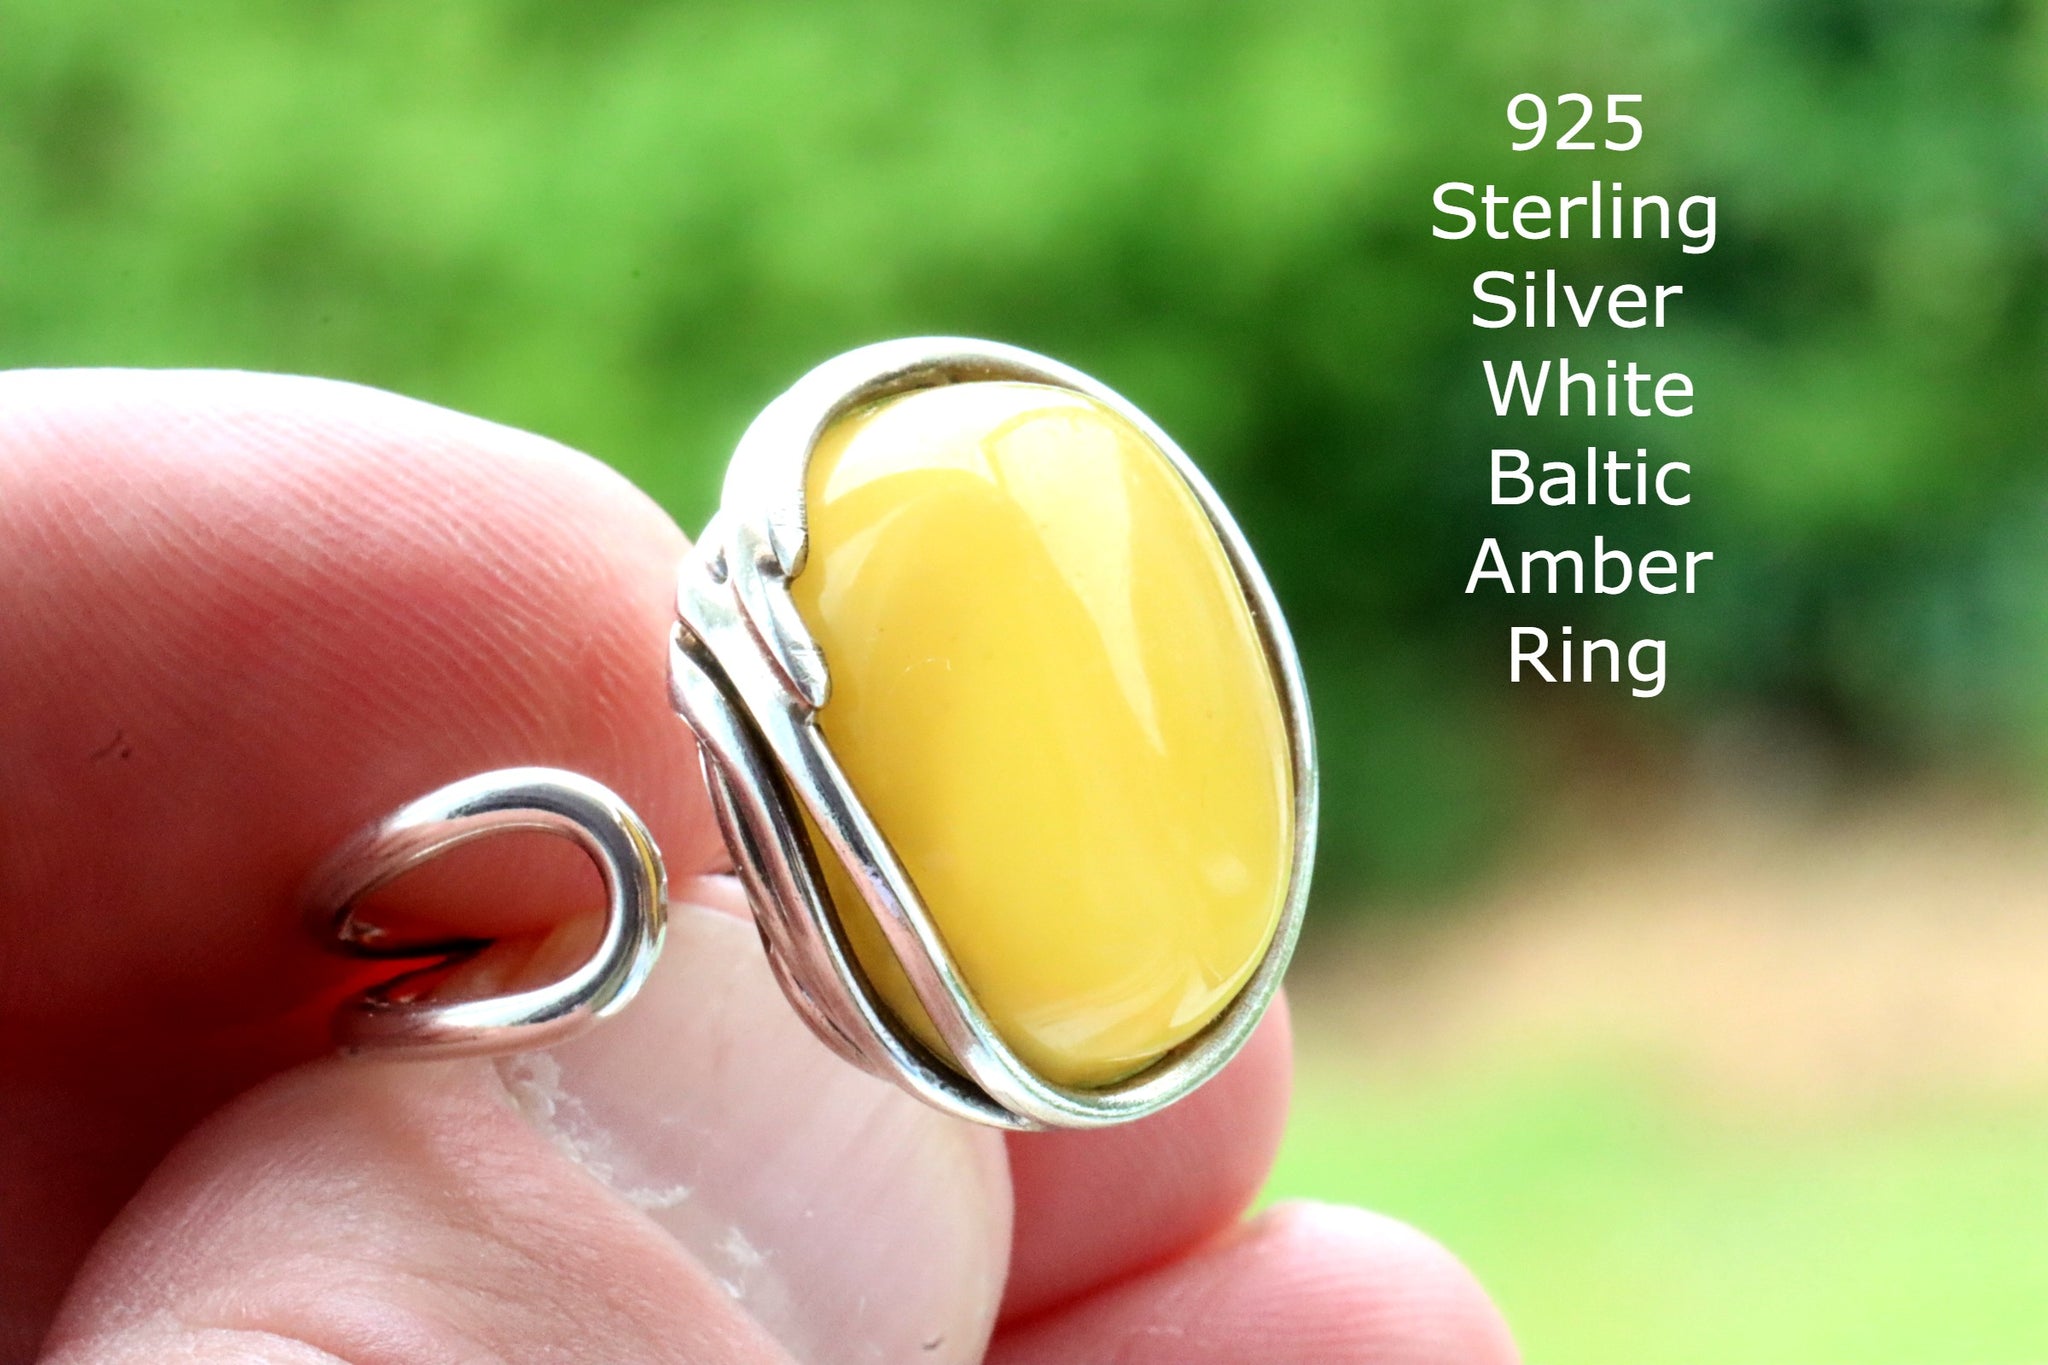 White Baltic Amber Ring with Free Earrings